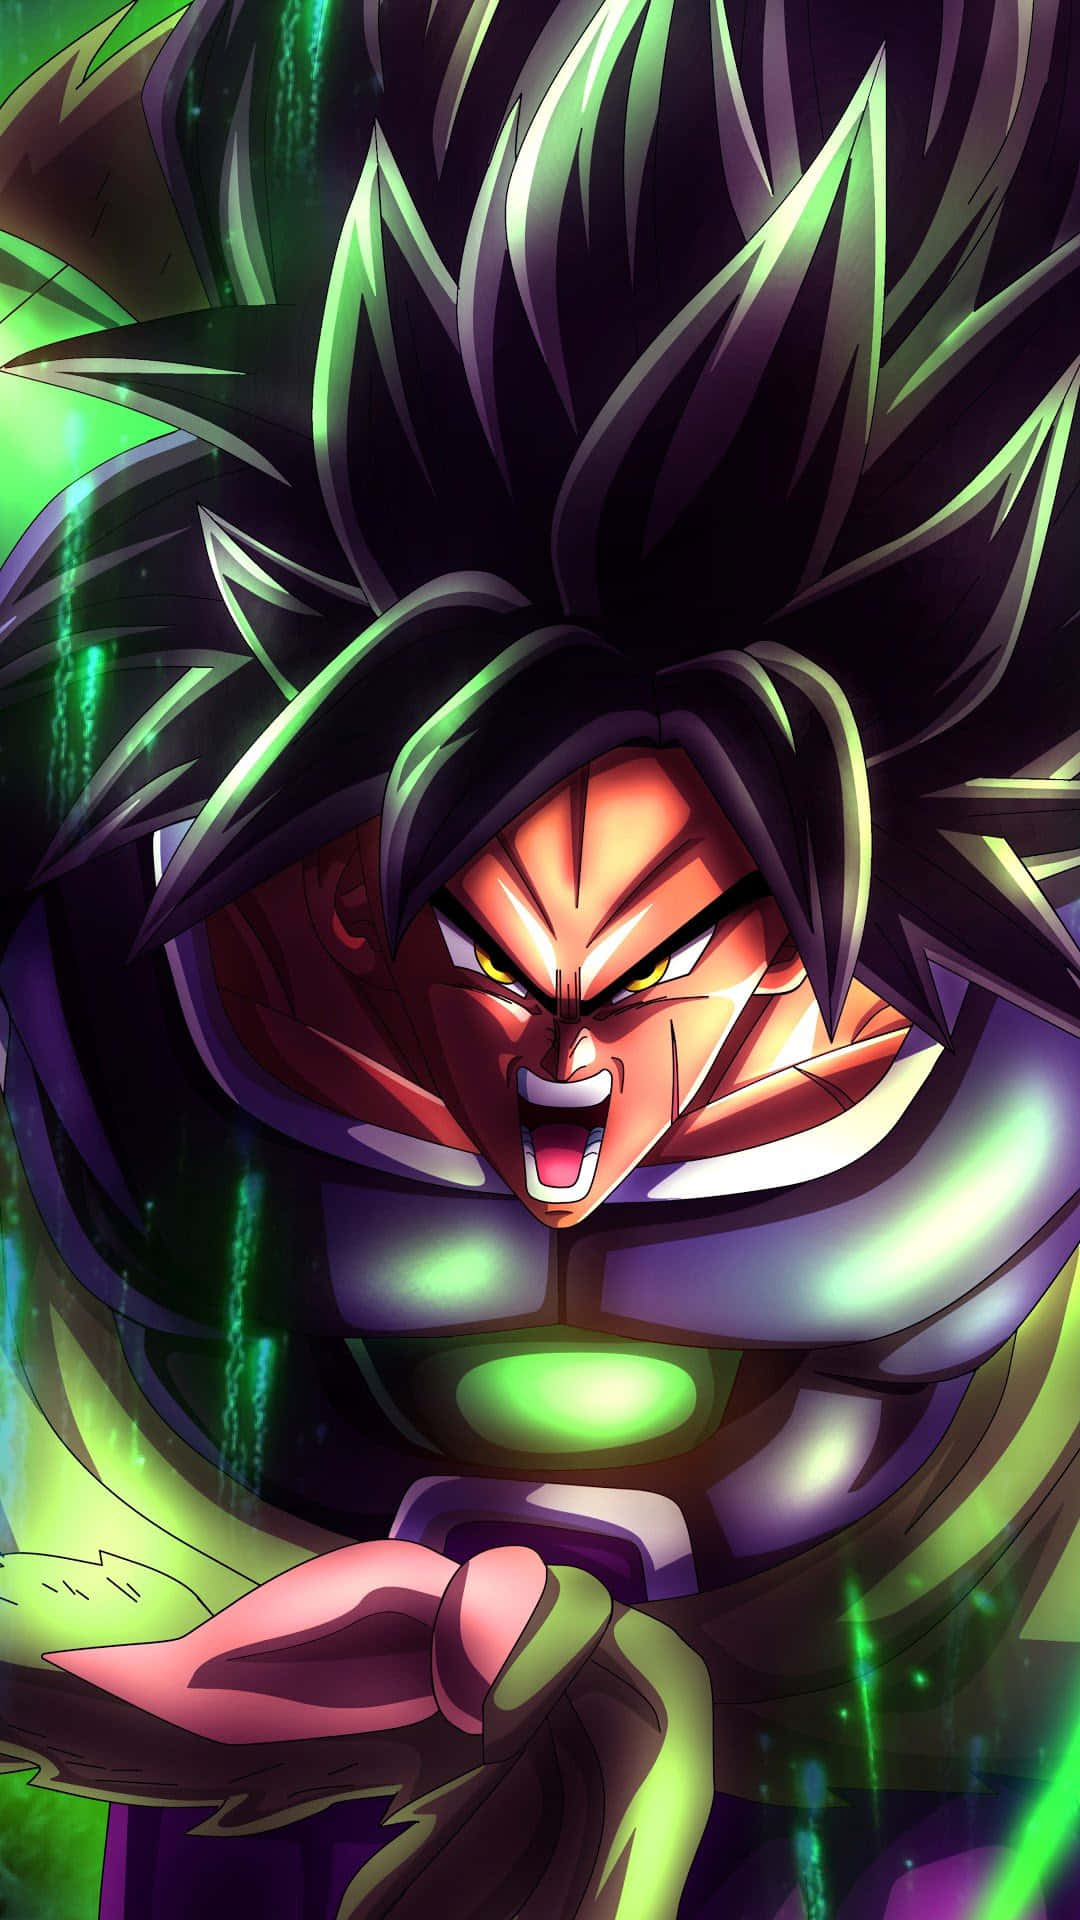 Get your digital life on track with the sleek and modern Broly Iphone Wallpaper